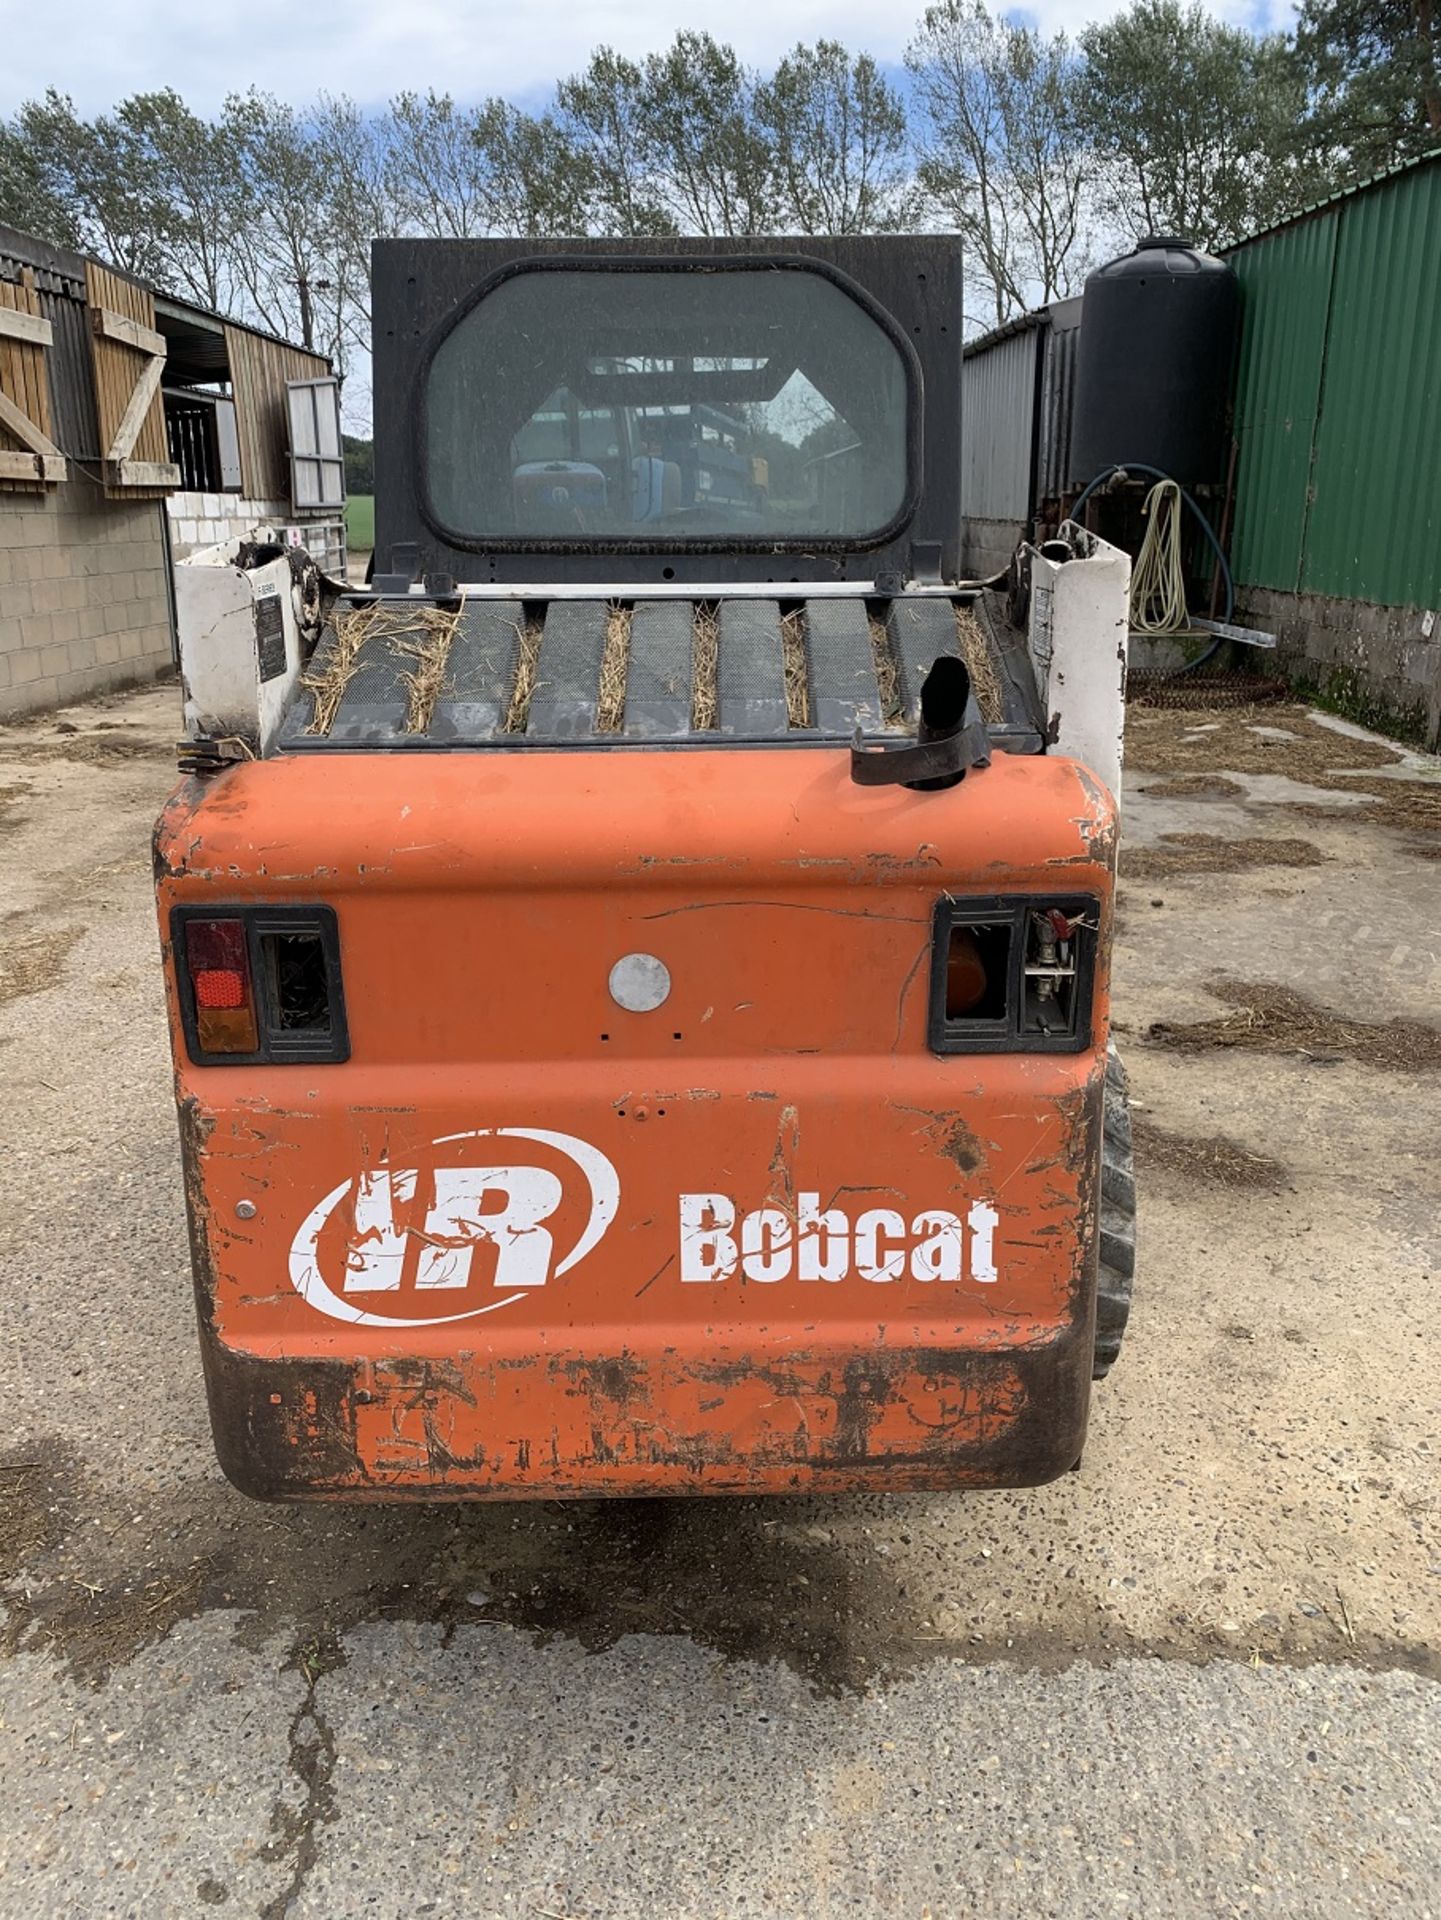 Bobcat 751 compact skid steer (1999), Rebuilt Engine in March 2020, Comes with Spare wheel, - Image 5 of 7